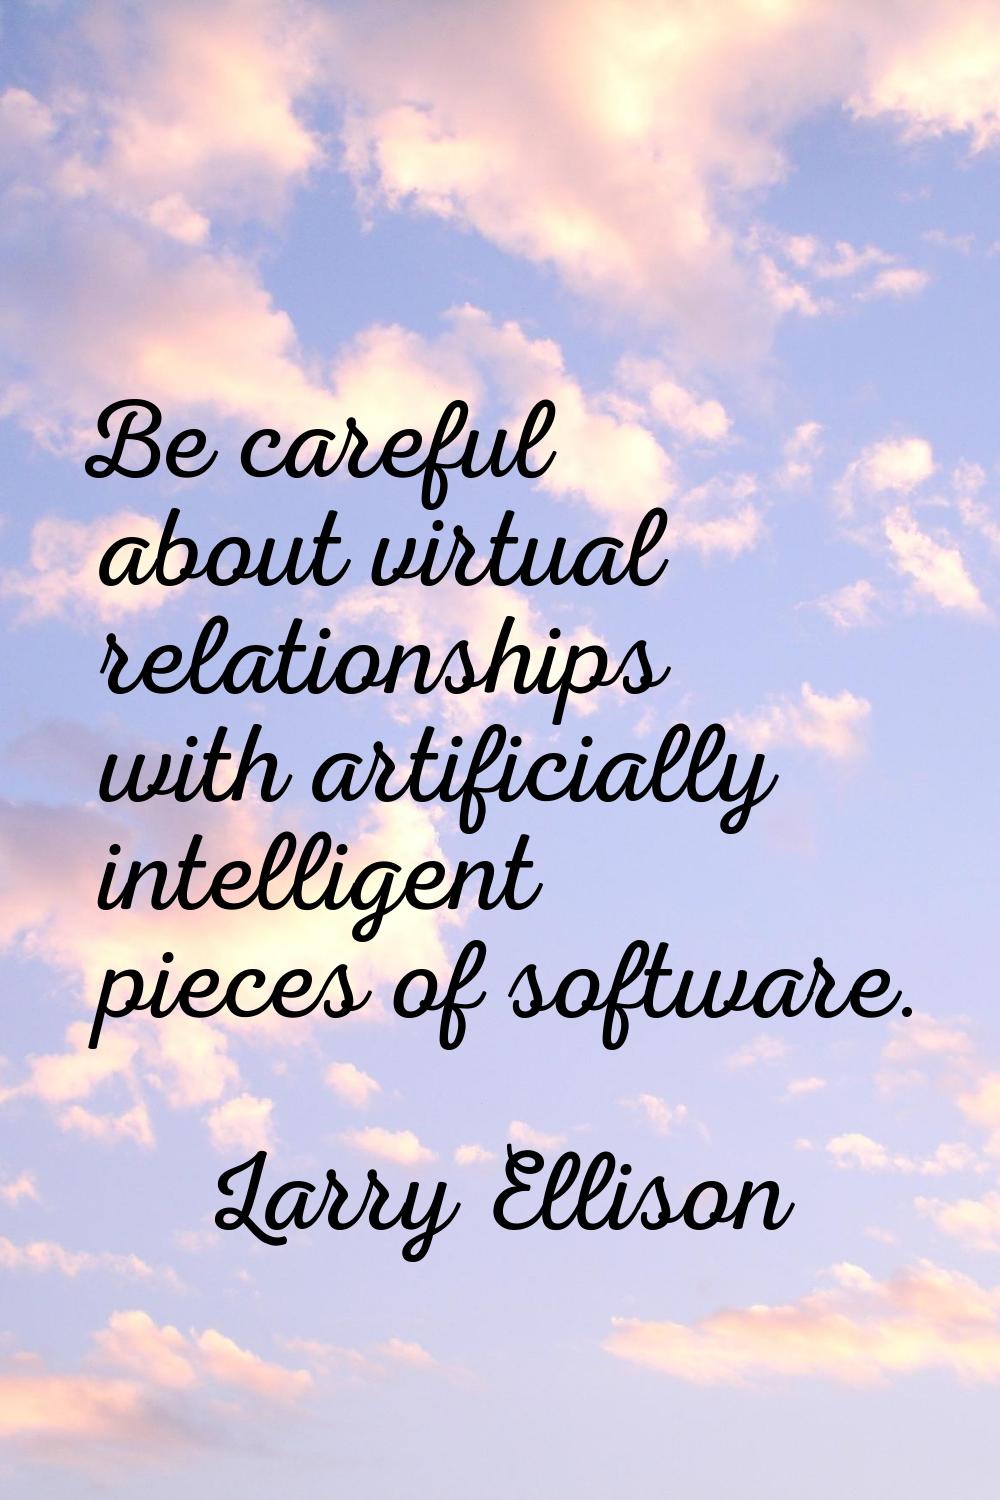 Be careful about virtual relationships with artificially intelligent pieces of software.